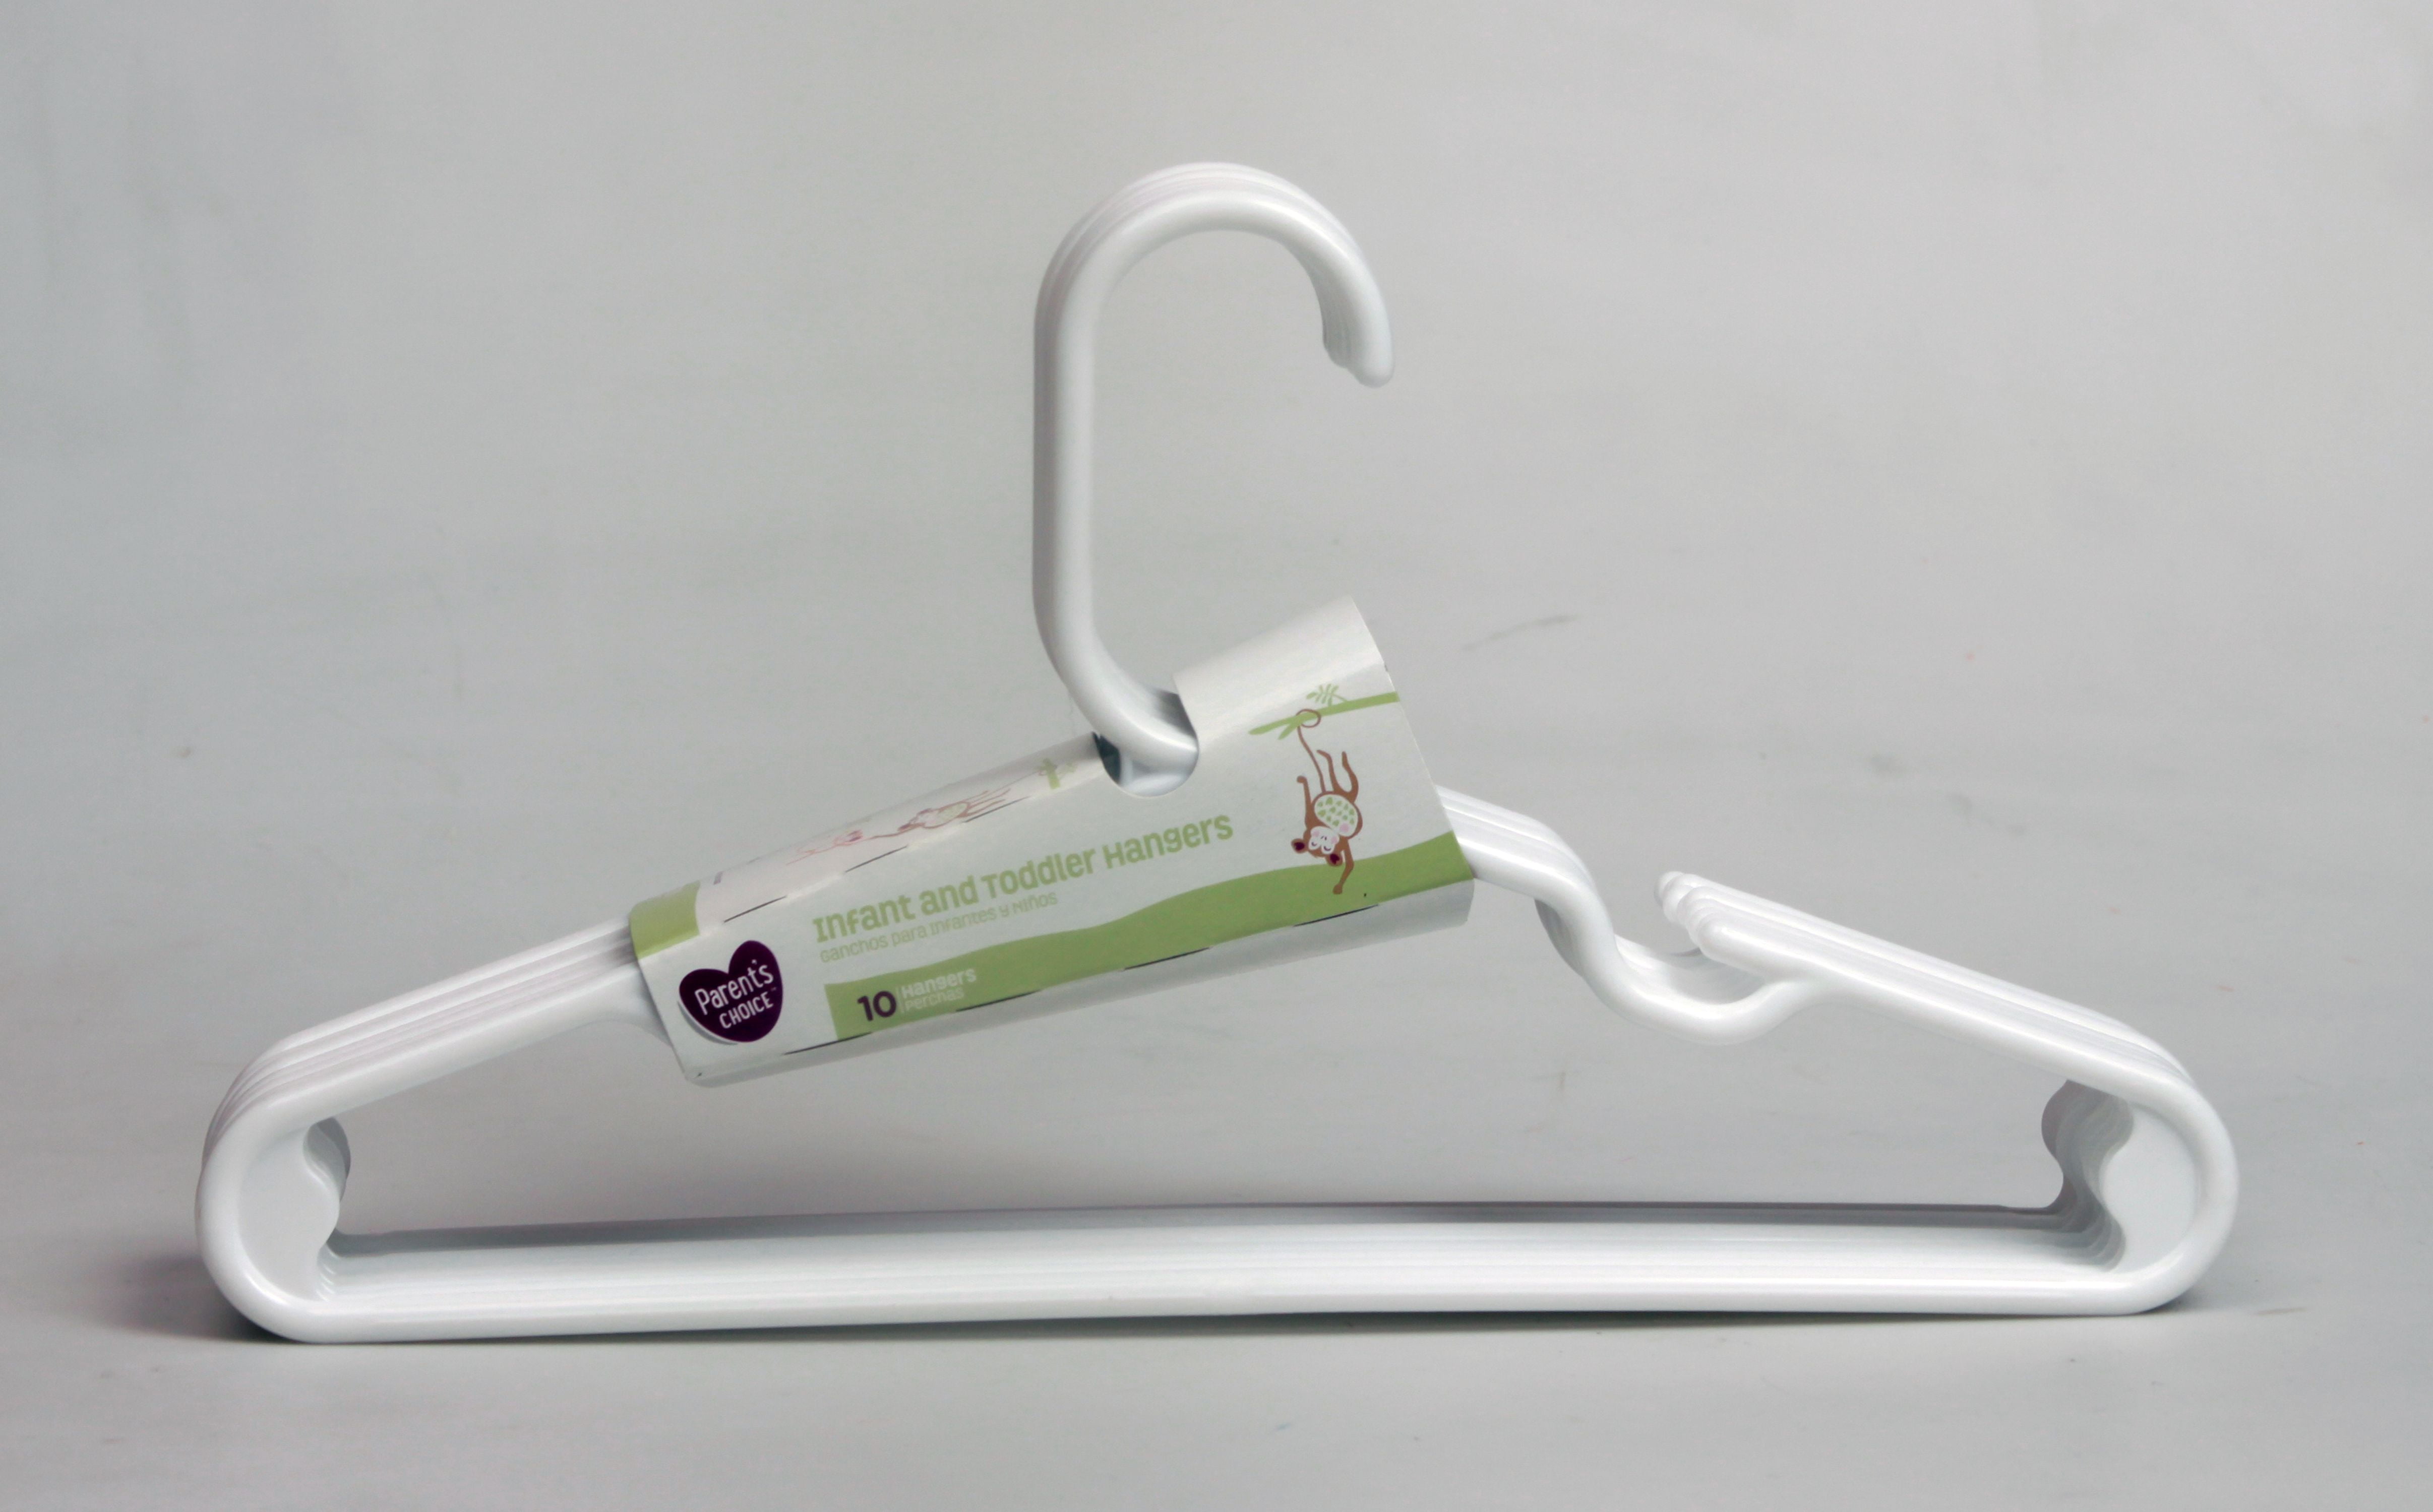 Parents' Choice Brand Infant and Toddlers Clothing Hanger, White